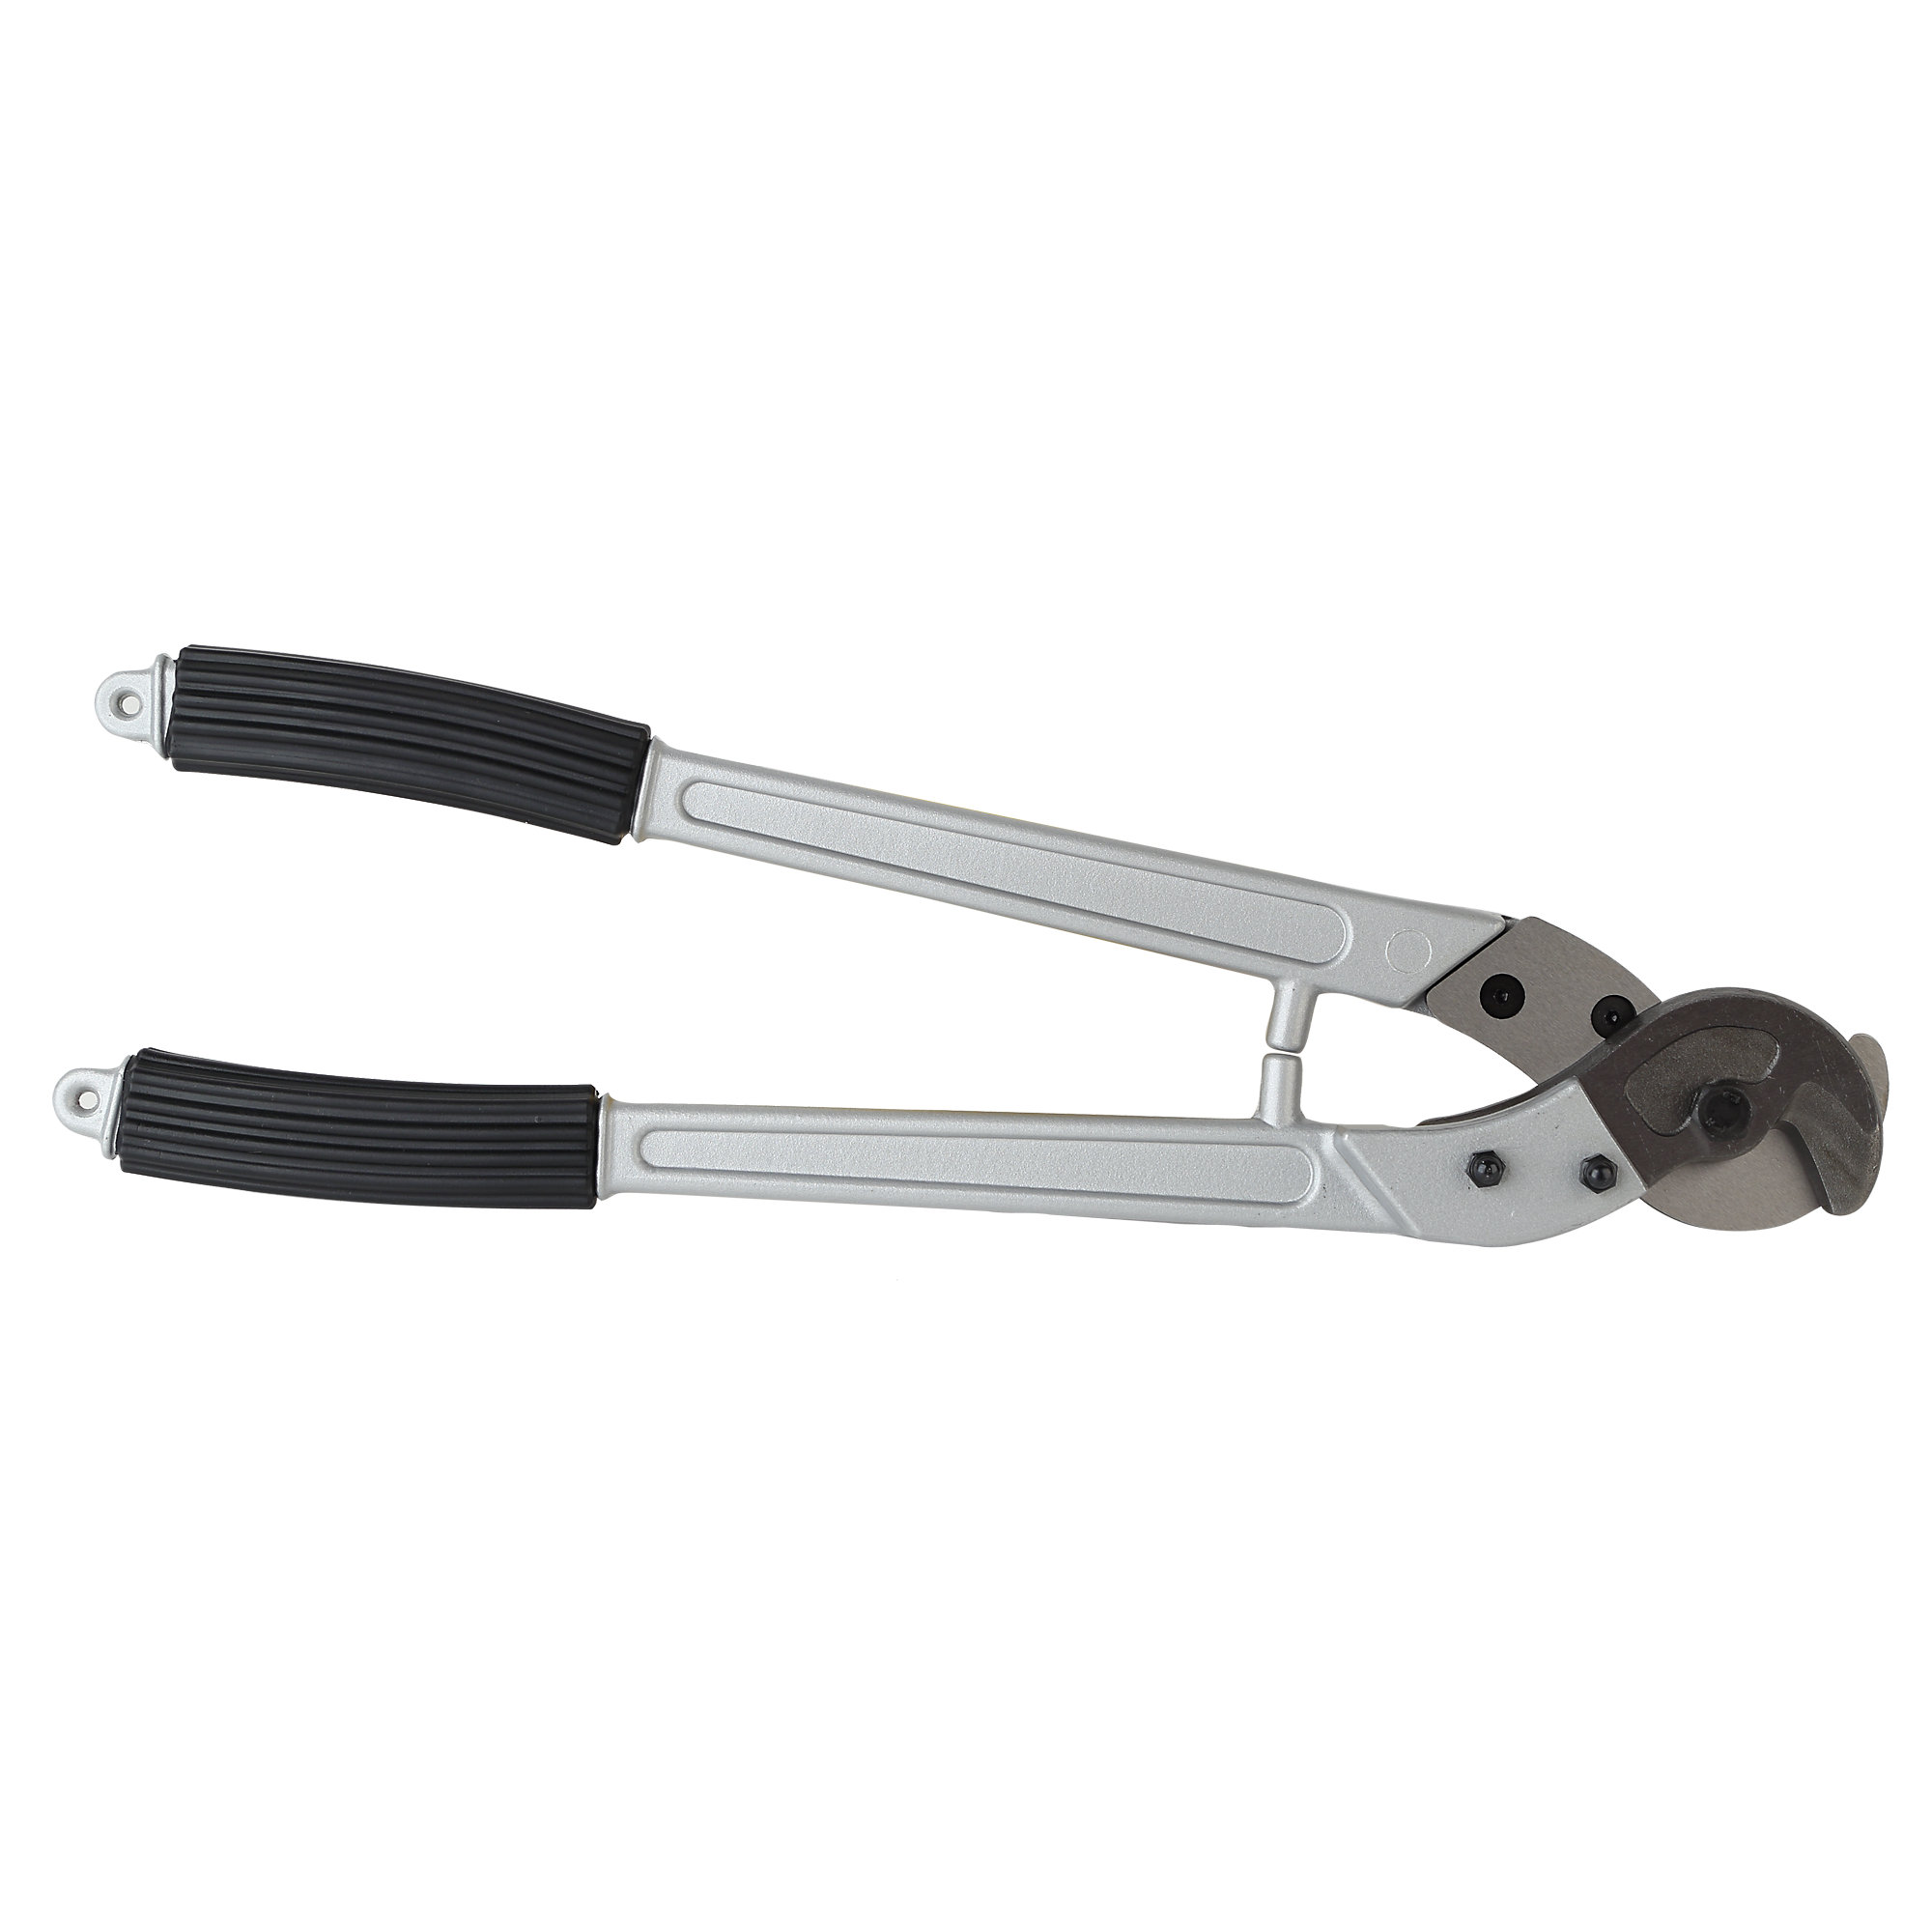 Cable Cutter, Up To 1/4" Cable